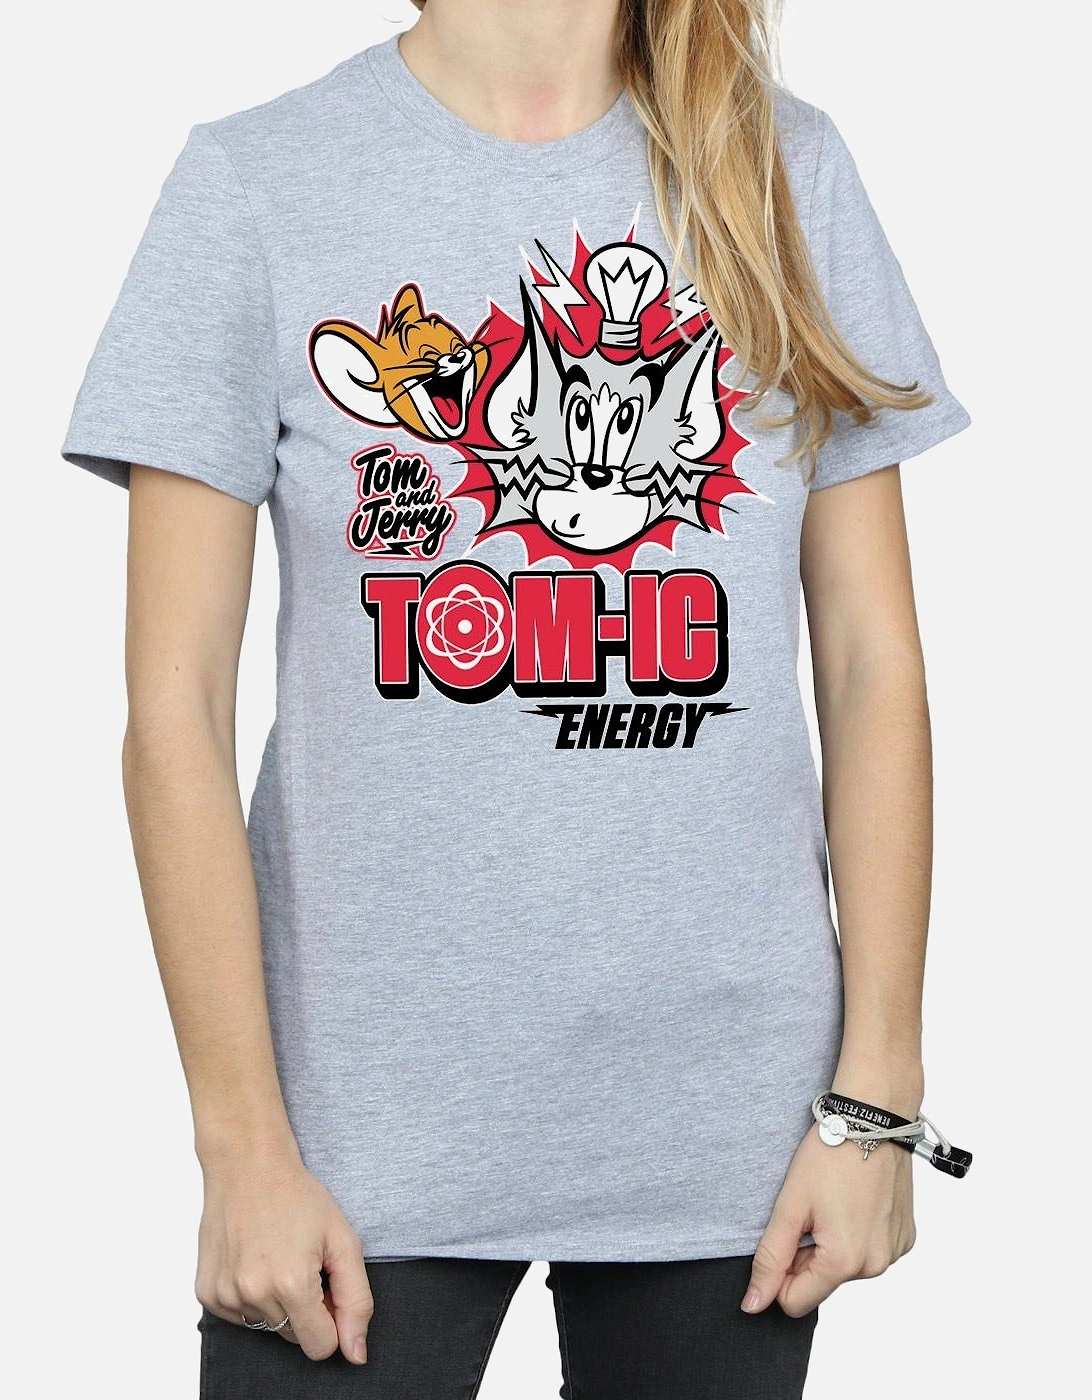 Tom And Jerry Womens/Ladies Tomic Energy Cotton Boyfriend T-Shirt